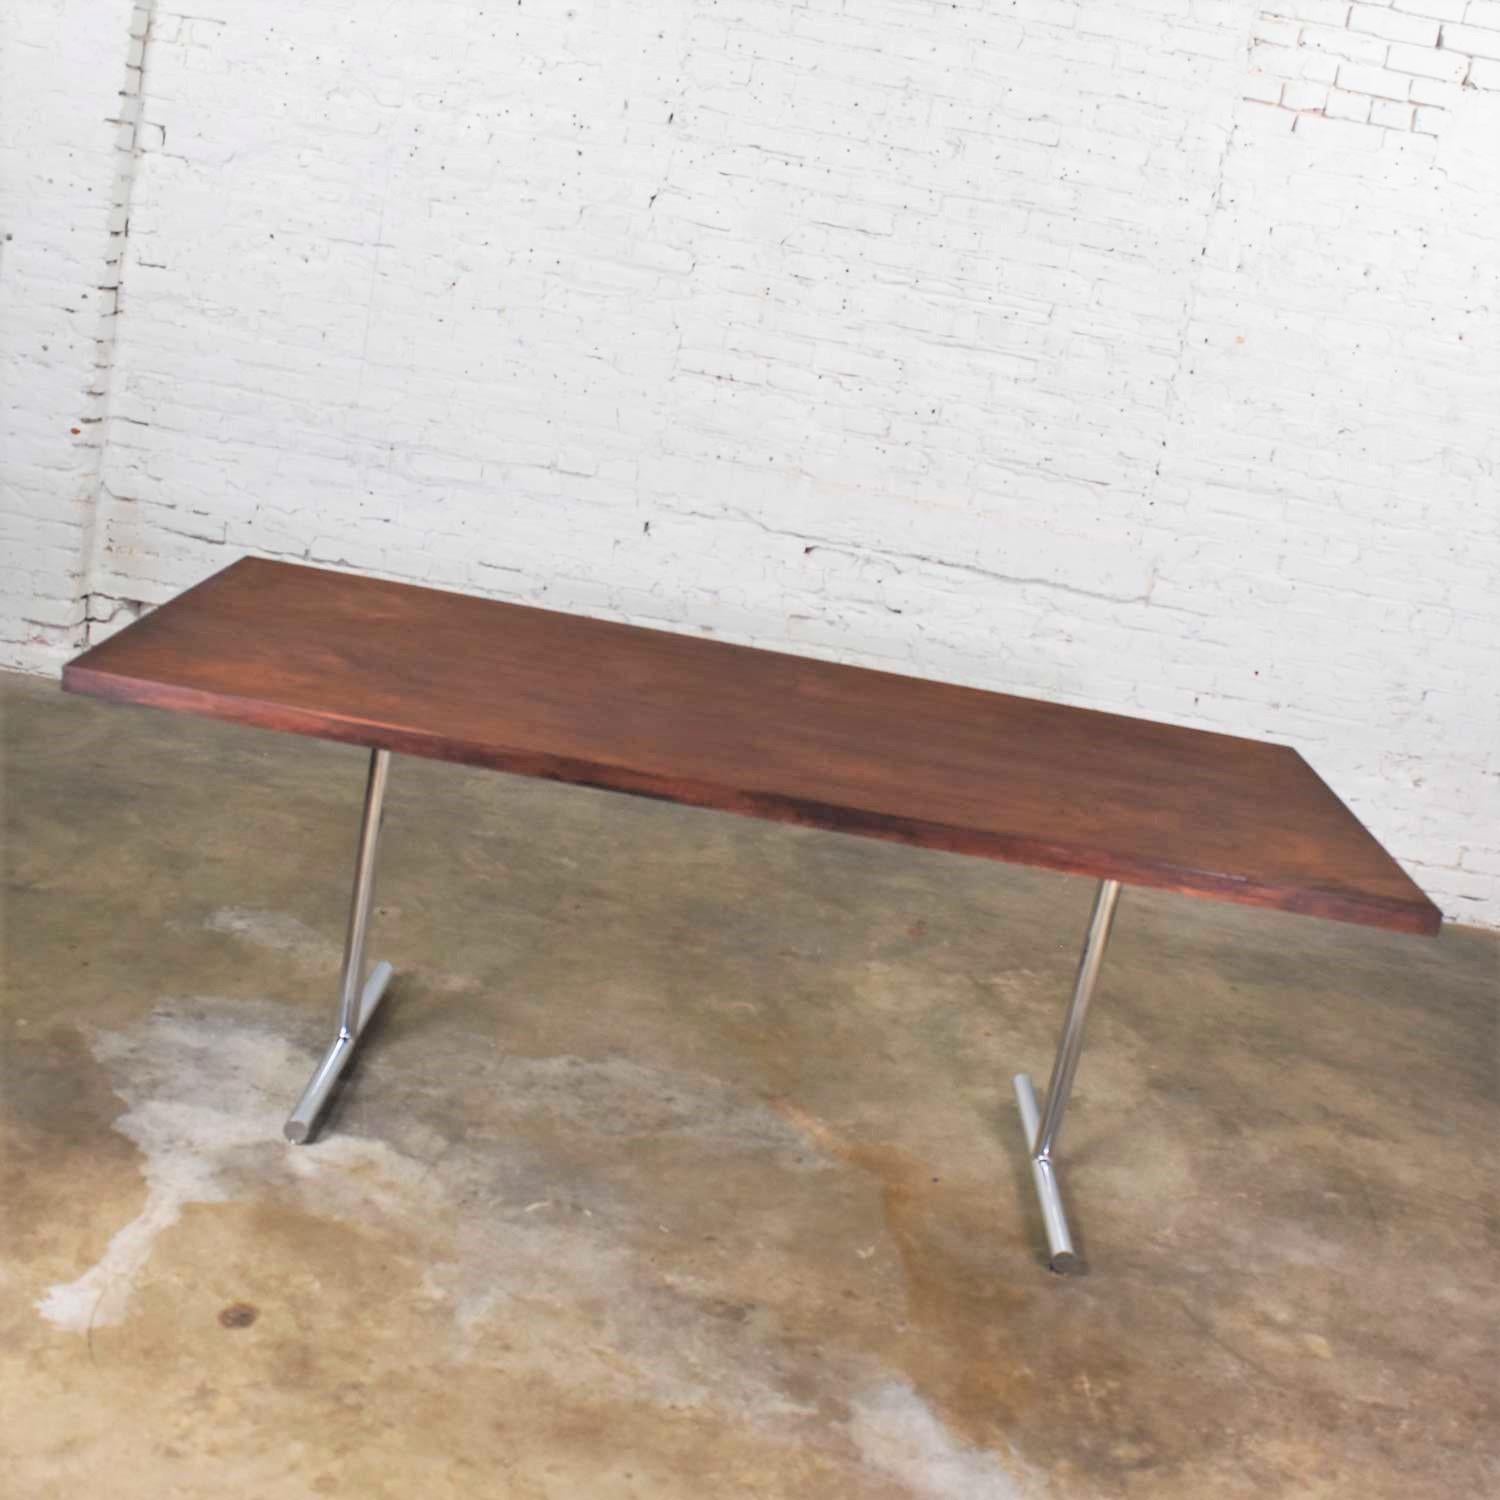 Handsome Omega dining table in rosewood and chrome designed attributed to Hans Eichenberger for Haussmann & Haussmann. The legs are marked with their maker which is Ernst Ries & Sohn. It is in wonderful overall vintage condition. The chrome base has